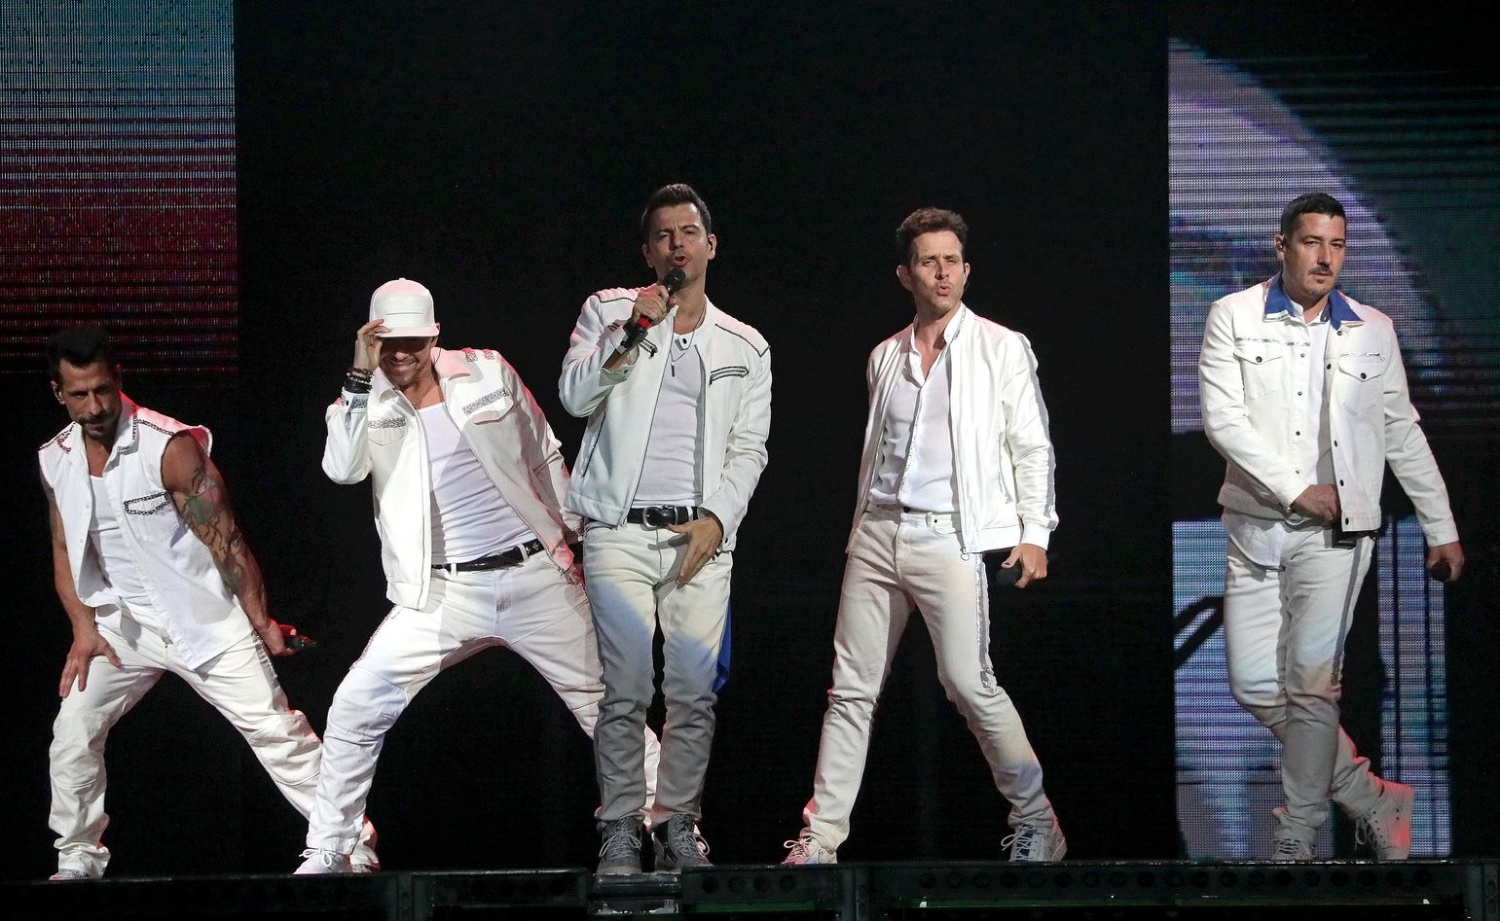 New Kids on the Block perform in concert at TD Garden in Boston on June 28, 2019. (Photo by Barry Chin/The Boston Globe via Getty Images)